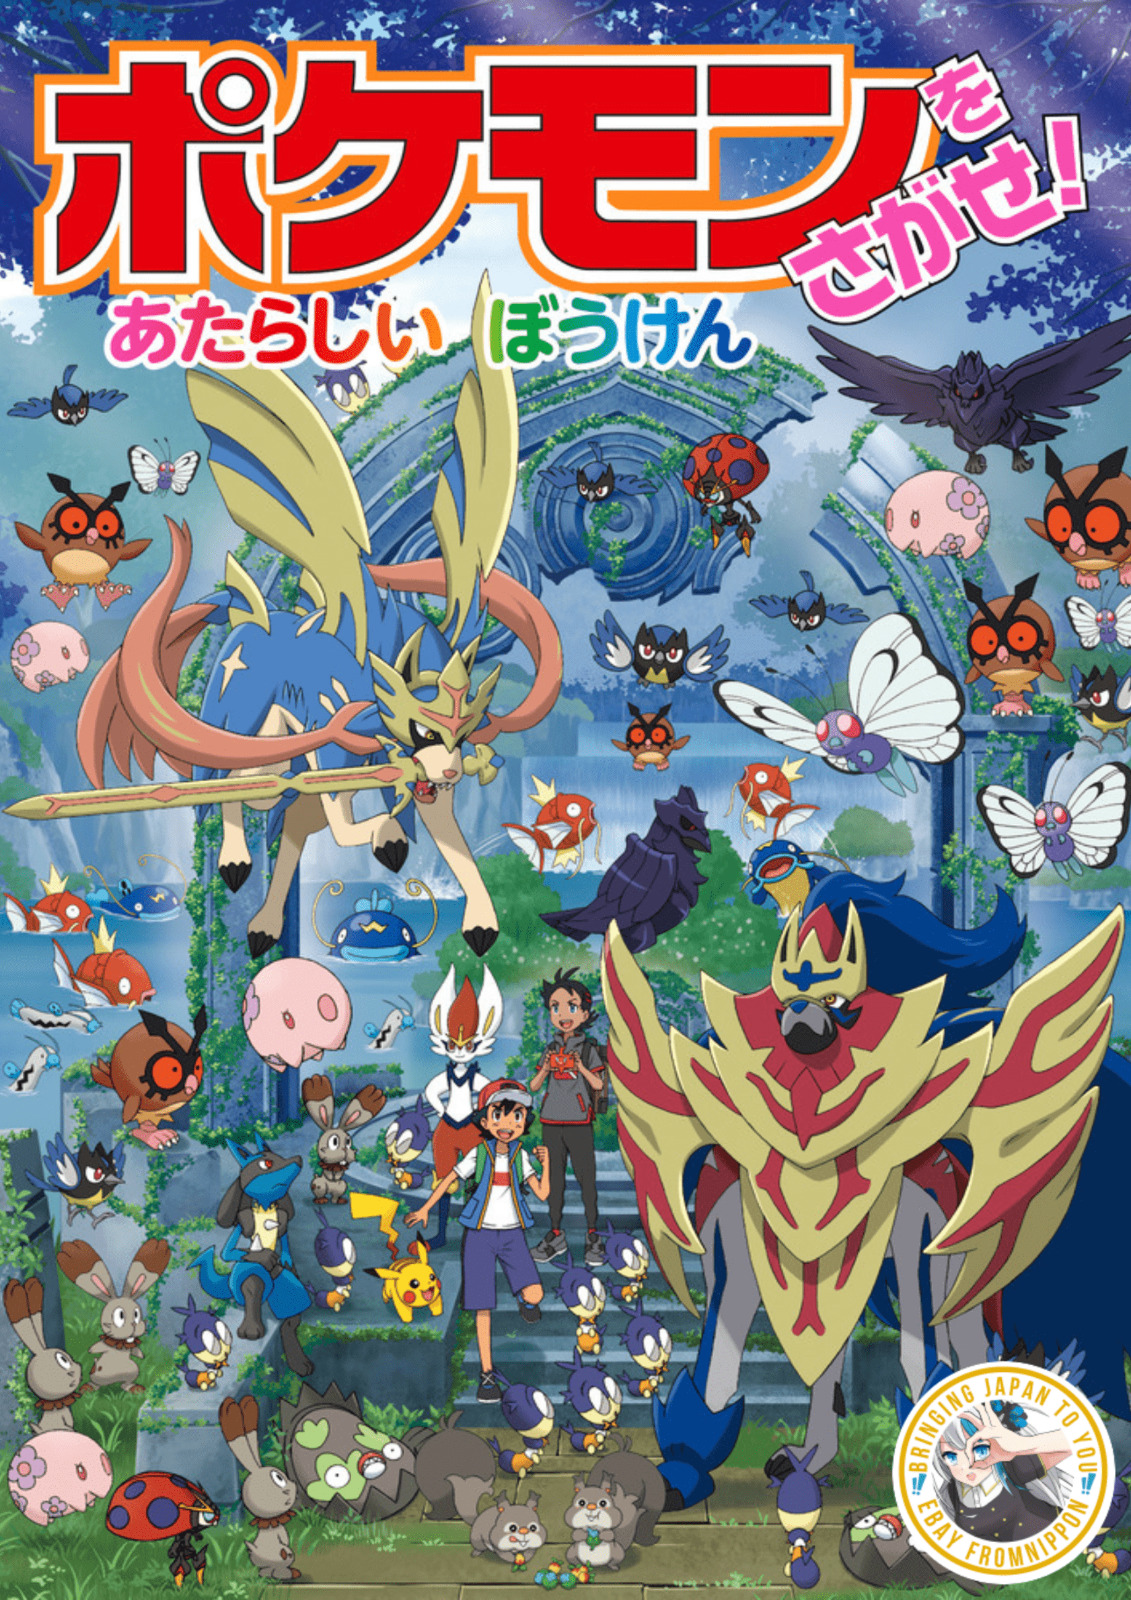 Let`s Find Pokemon #1-14 Japanese Picture book for children Sold Individually